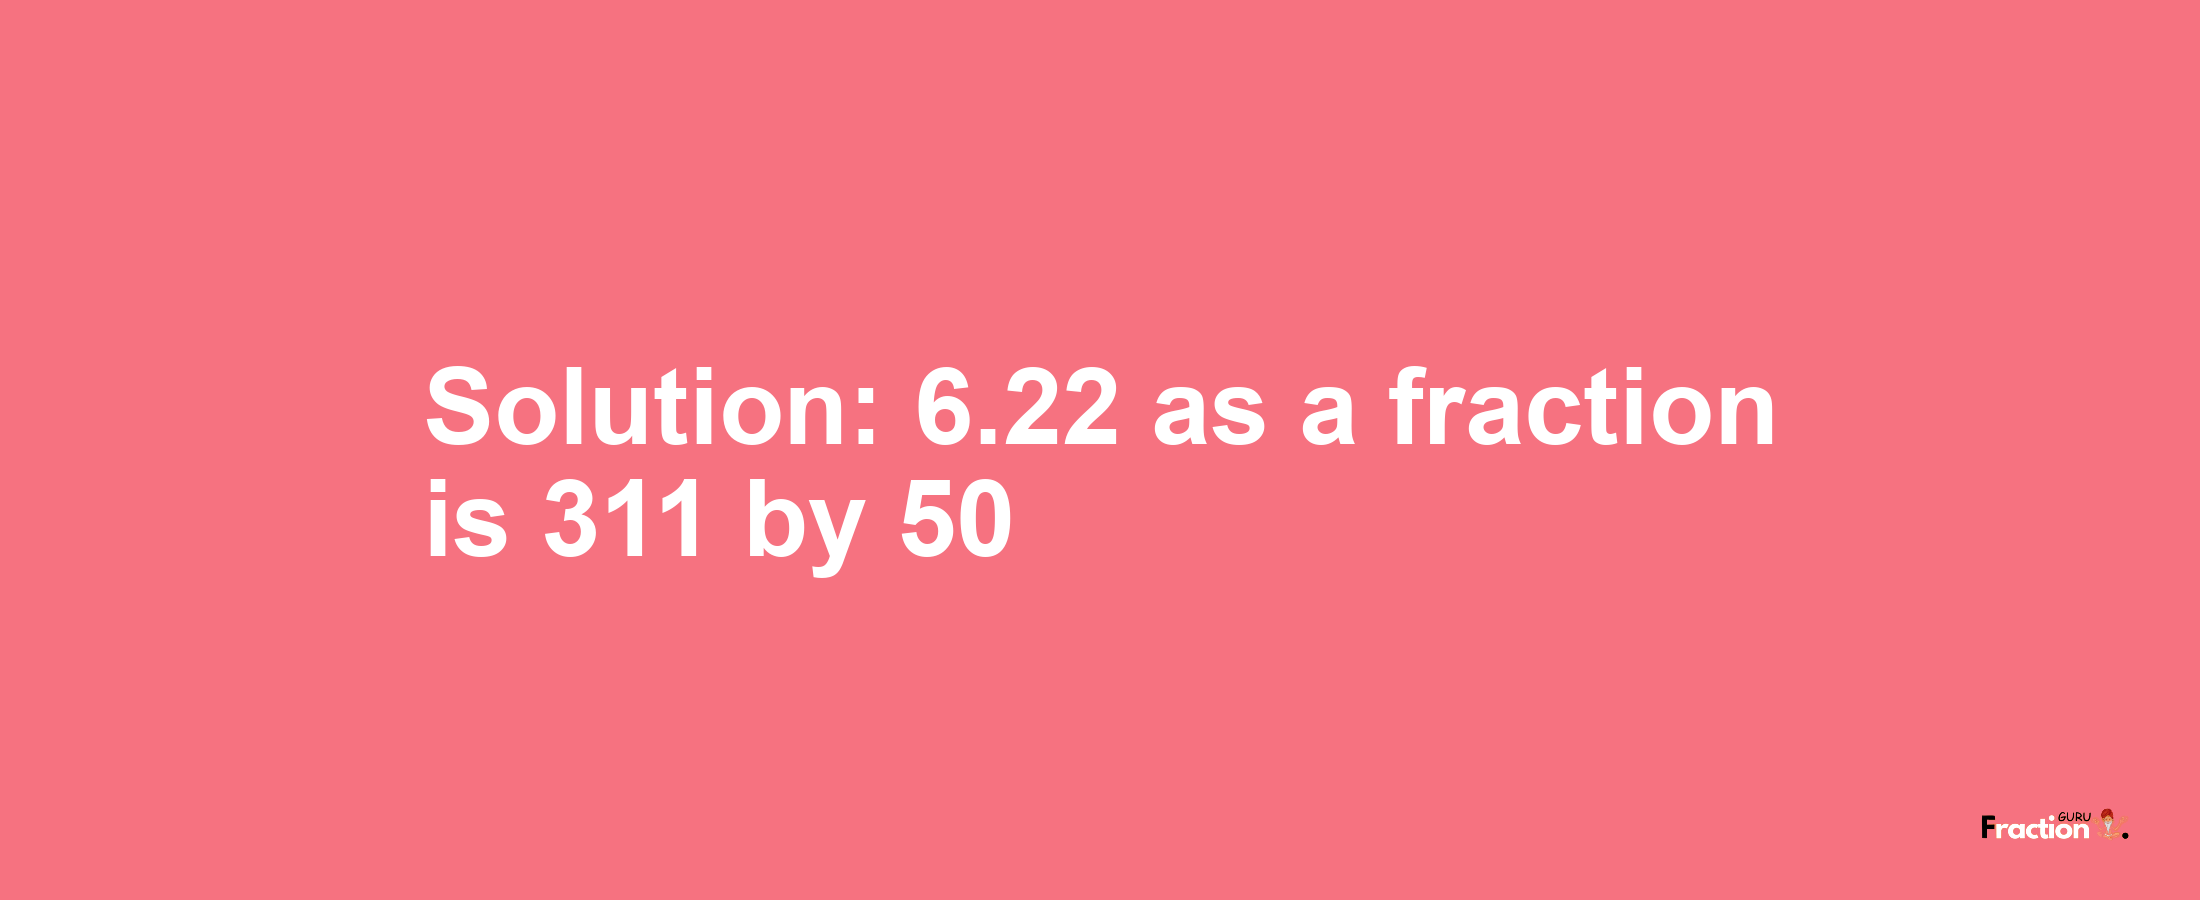 Solution:6.22 as a fraction is 311/50